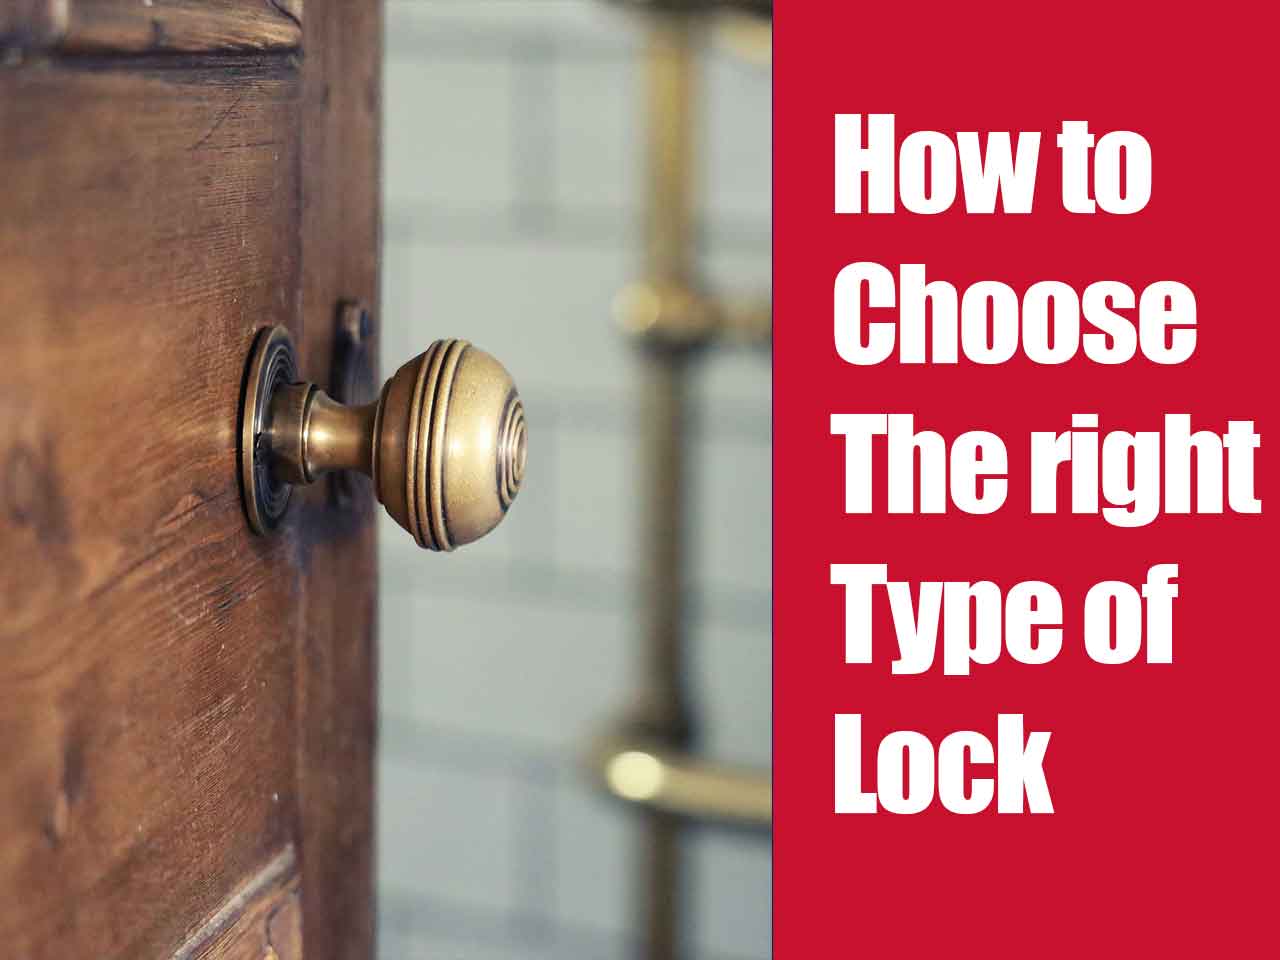 How to choose the right type of lock - Unlocky Locksmiths